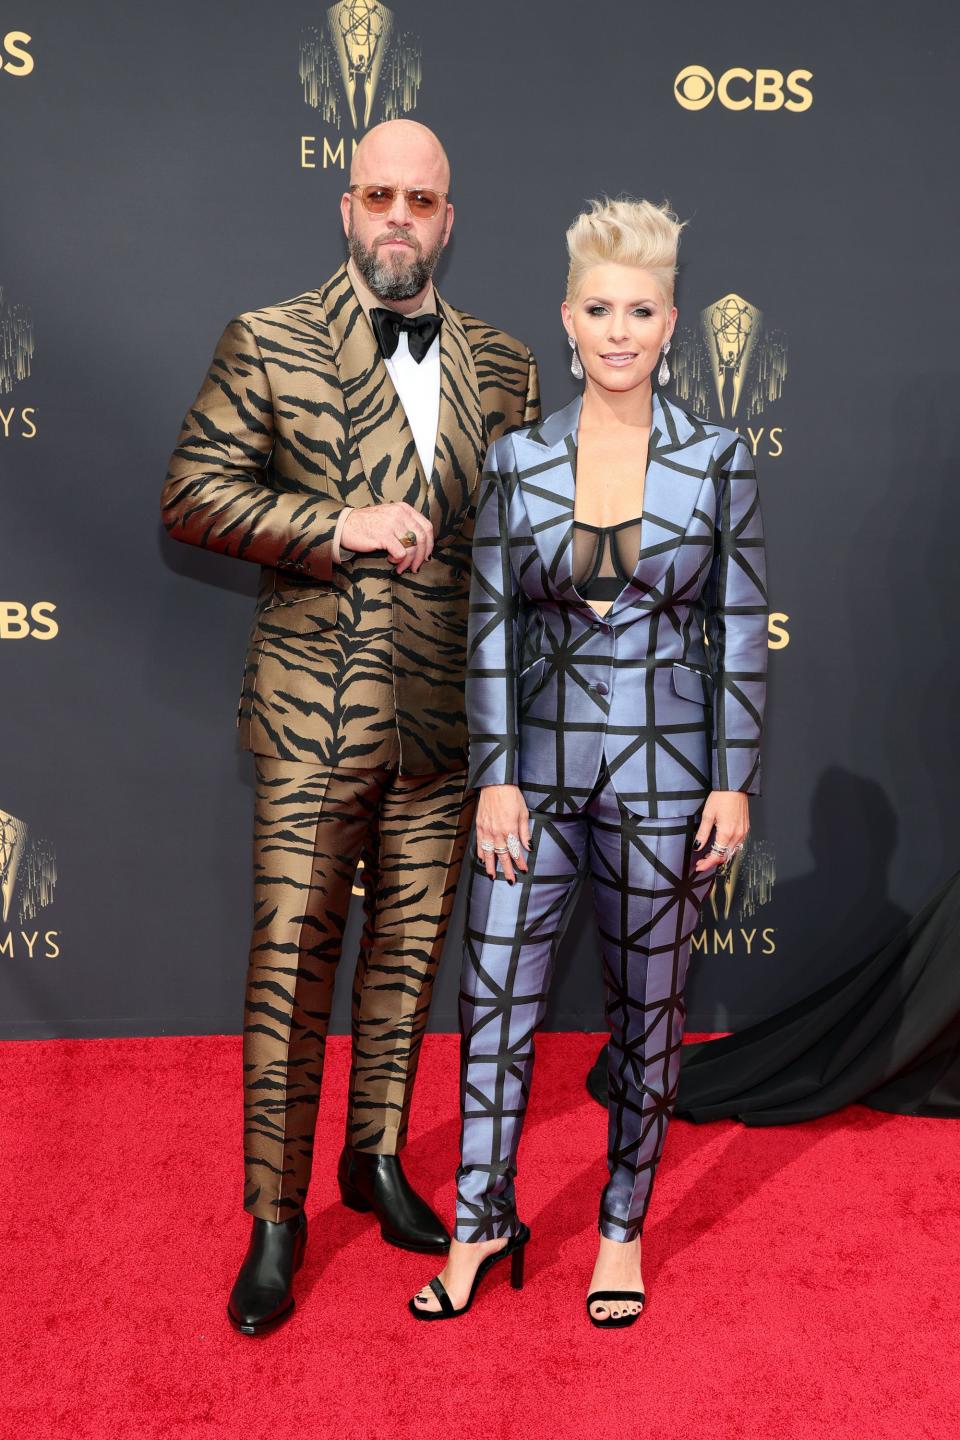 Chris and Rachel Sullivan wear animal print suits on the Emmys red carpet.